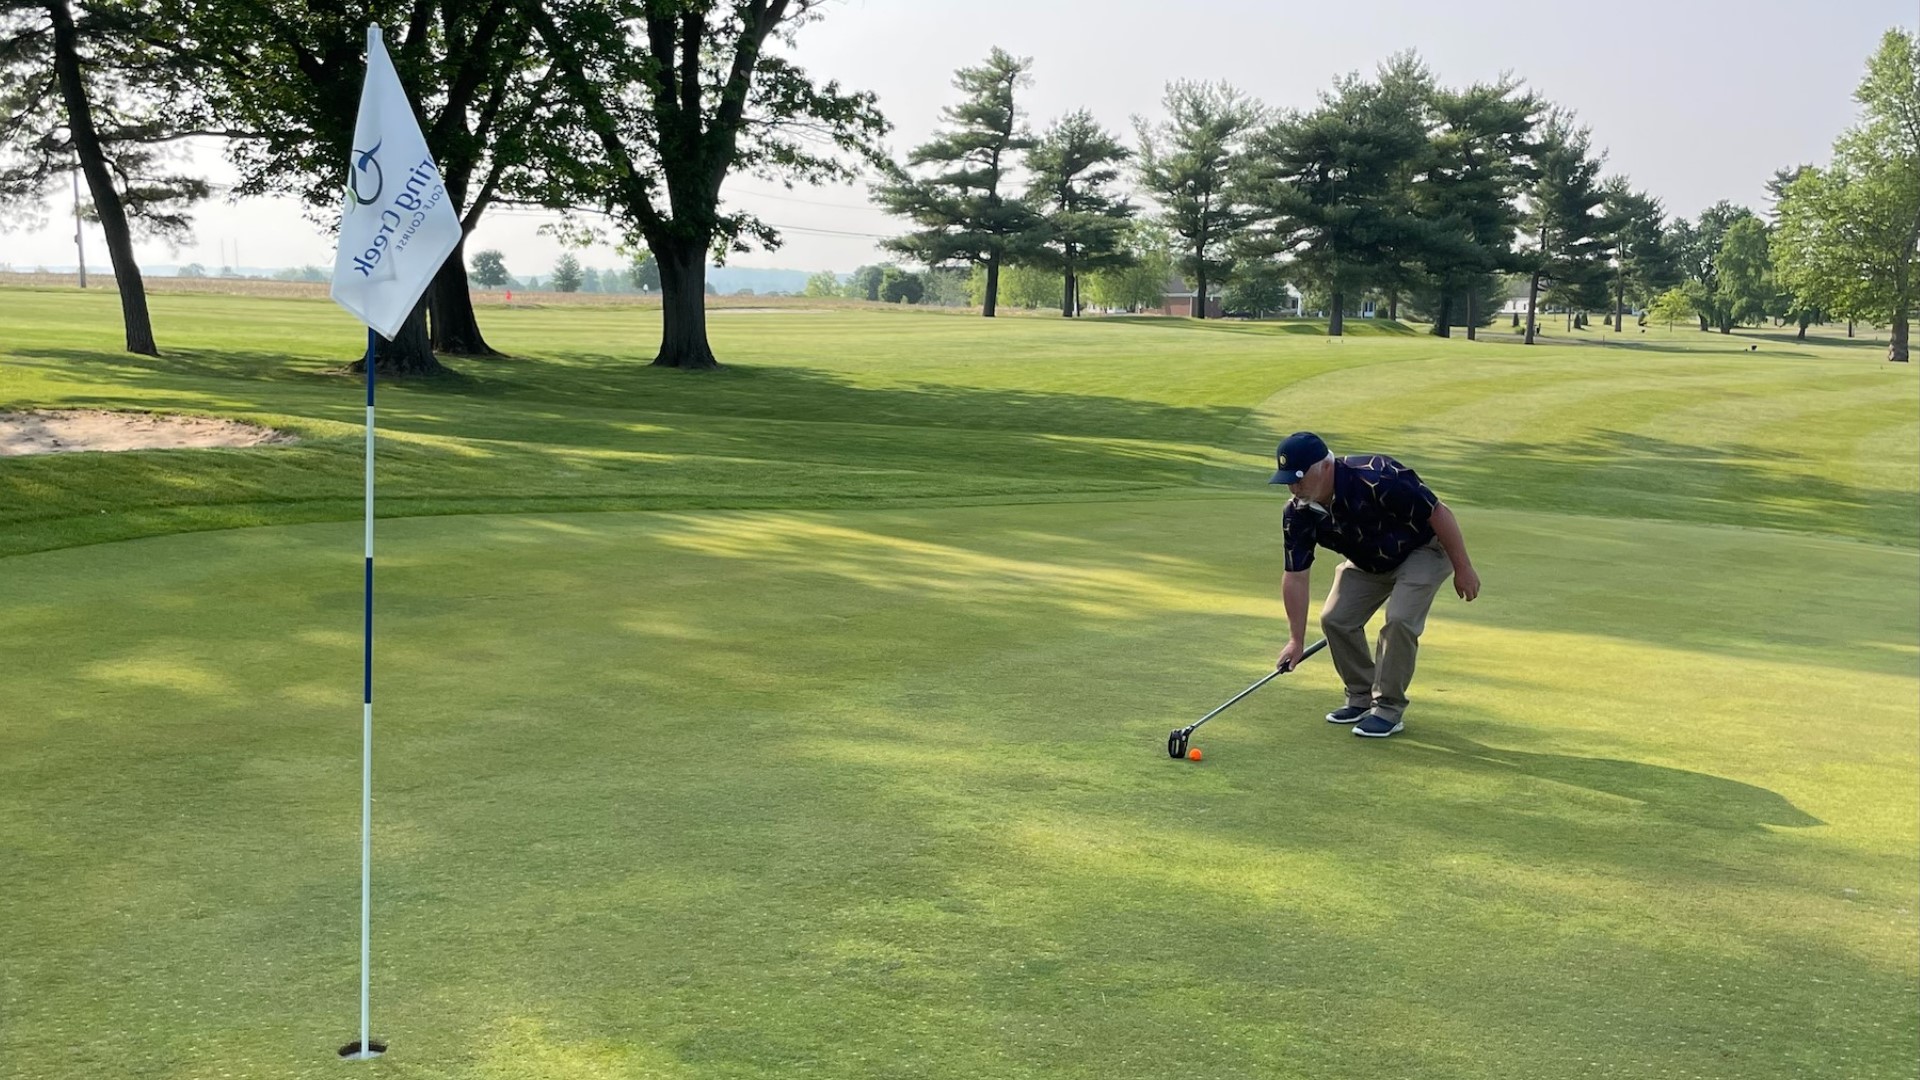 The sport involves a stick that is equipped for every type of shot on the golf course. It's a fun twist on the game of golf and one many hope keeps growing.